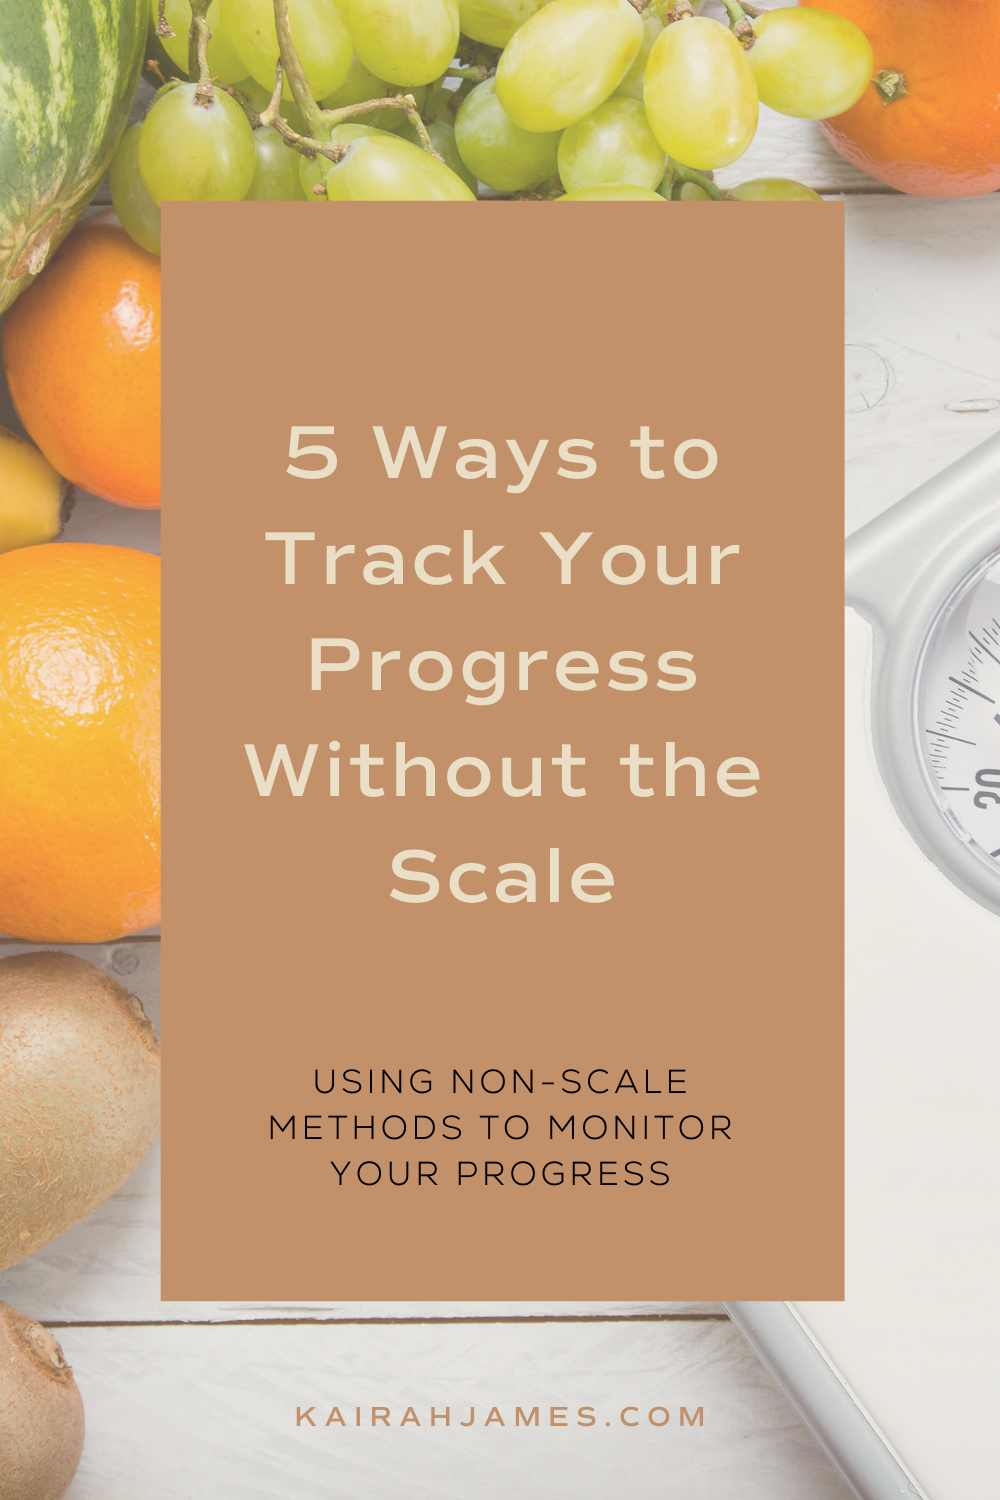 5 Ways to Track Your Progress Without the Scale